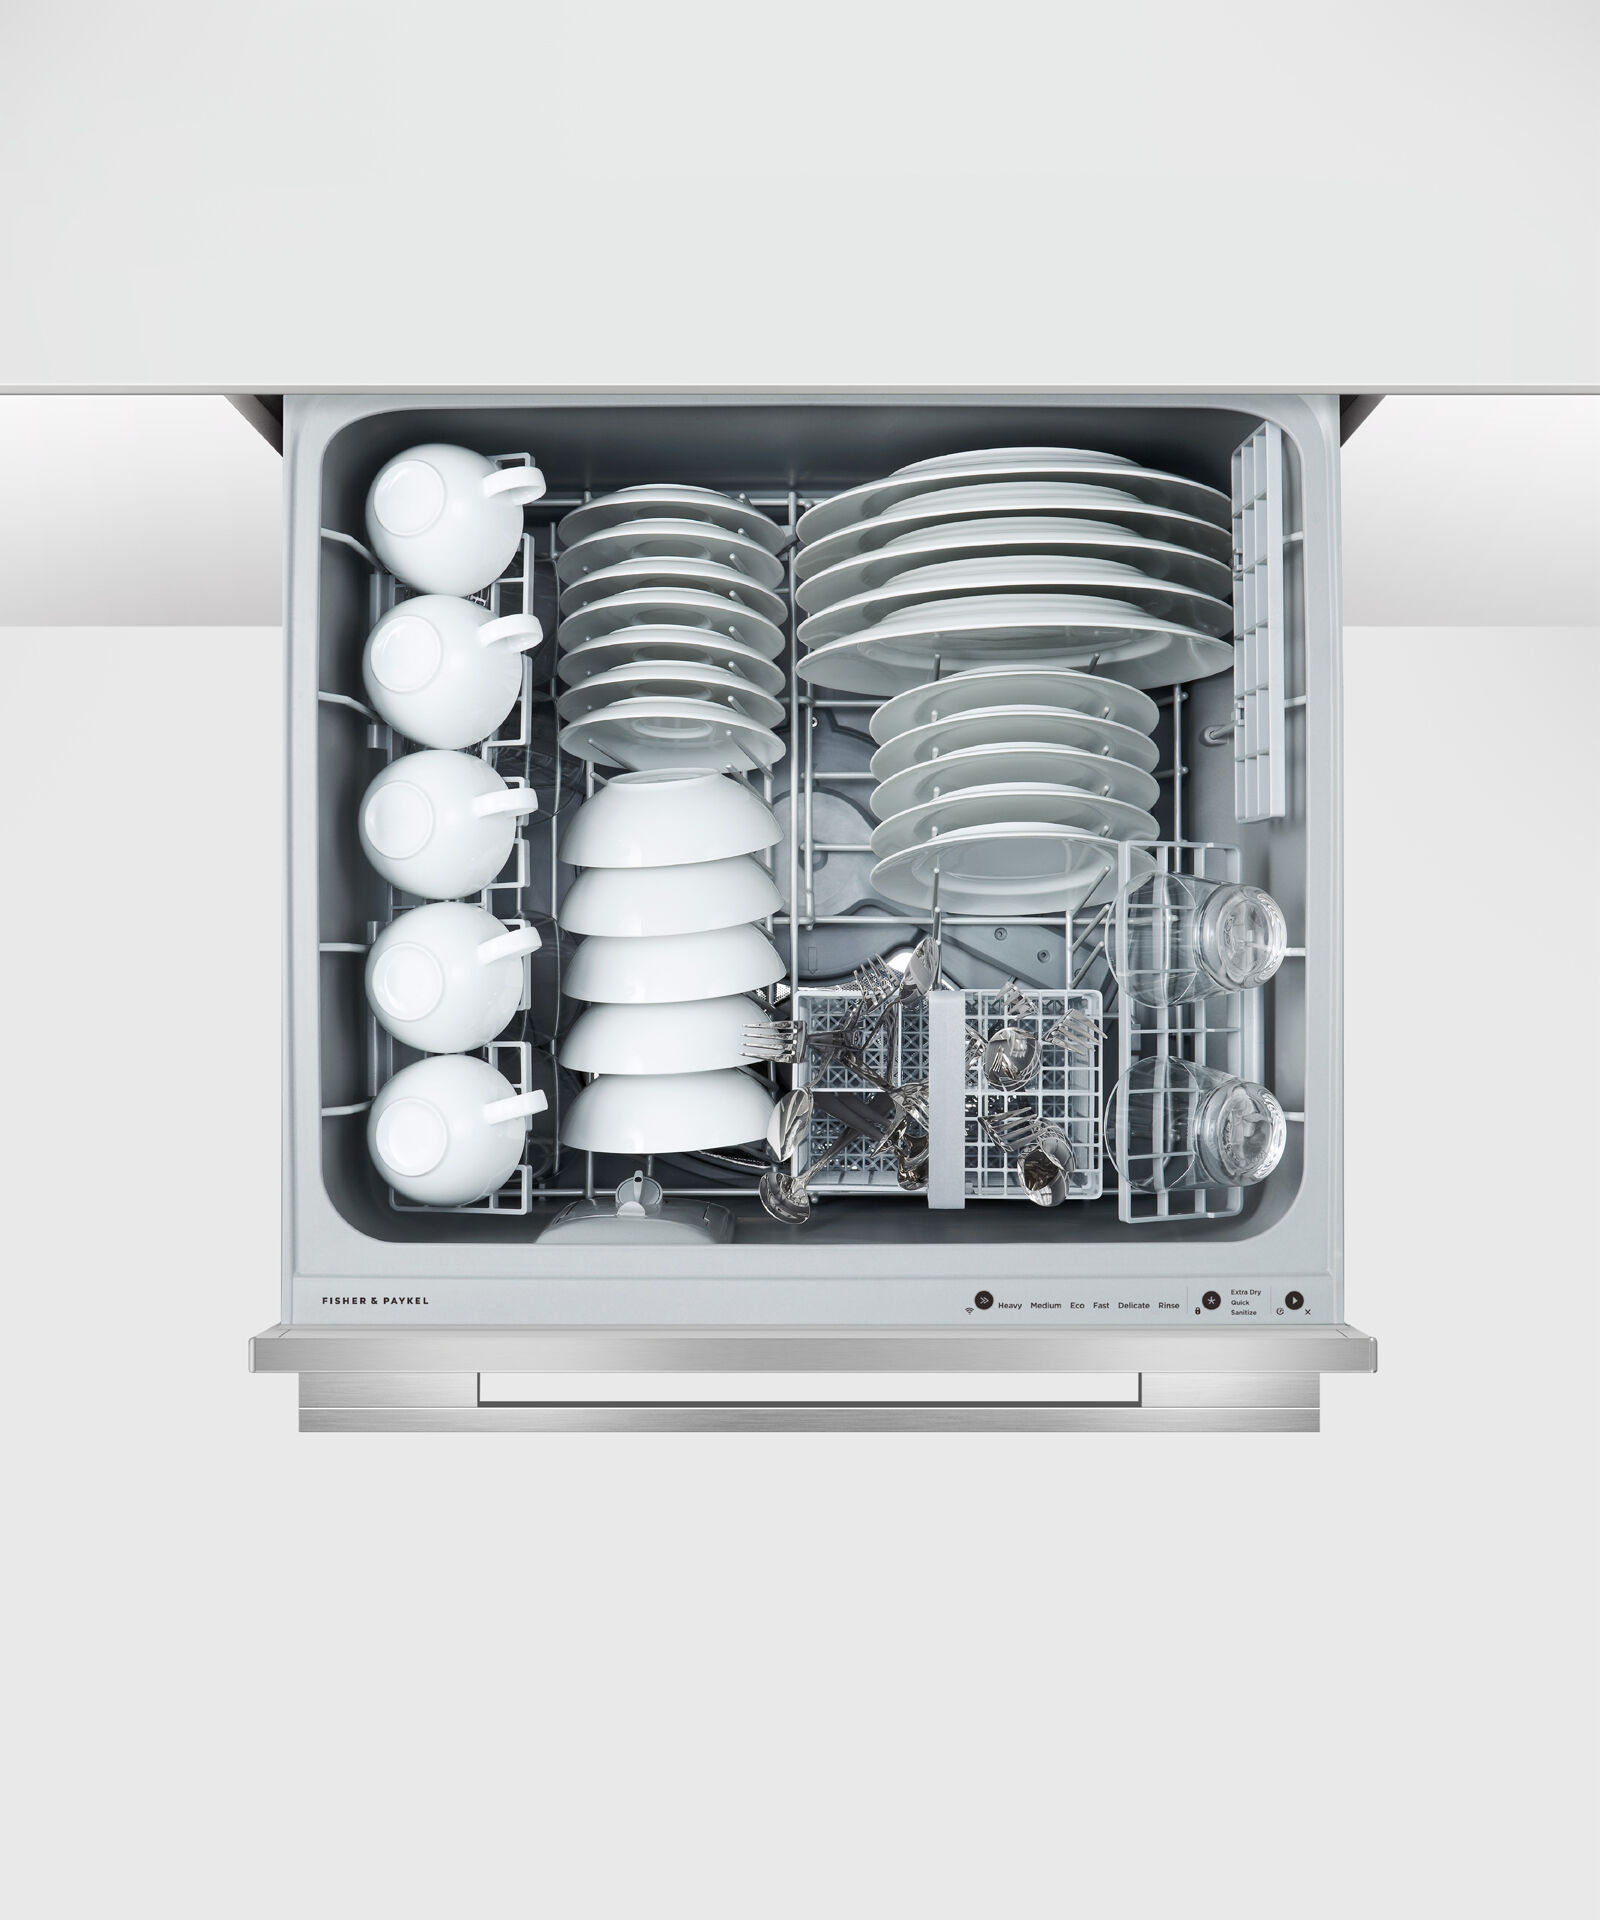 buy fisher and paykel dishwasher